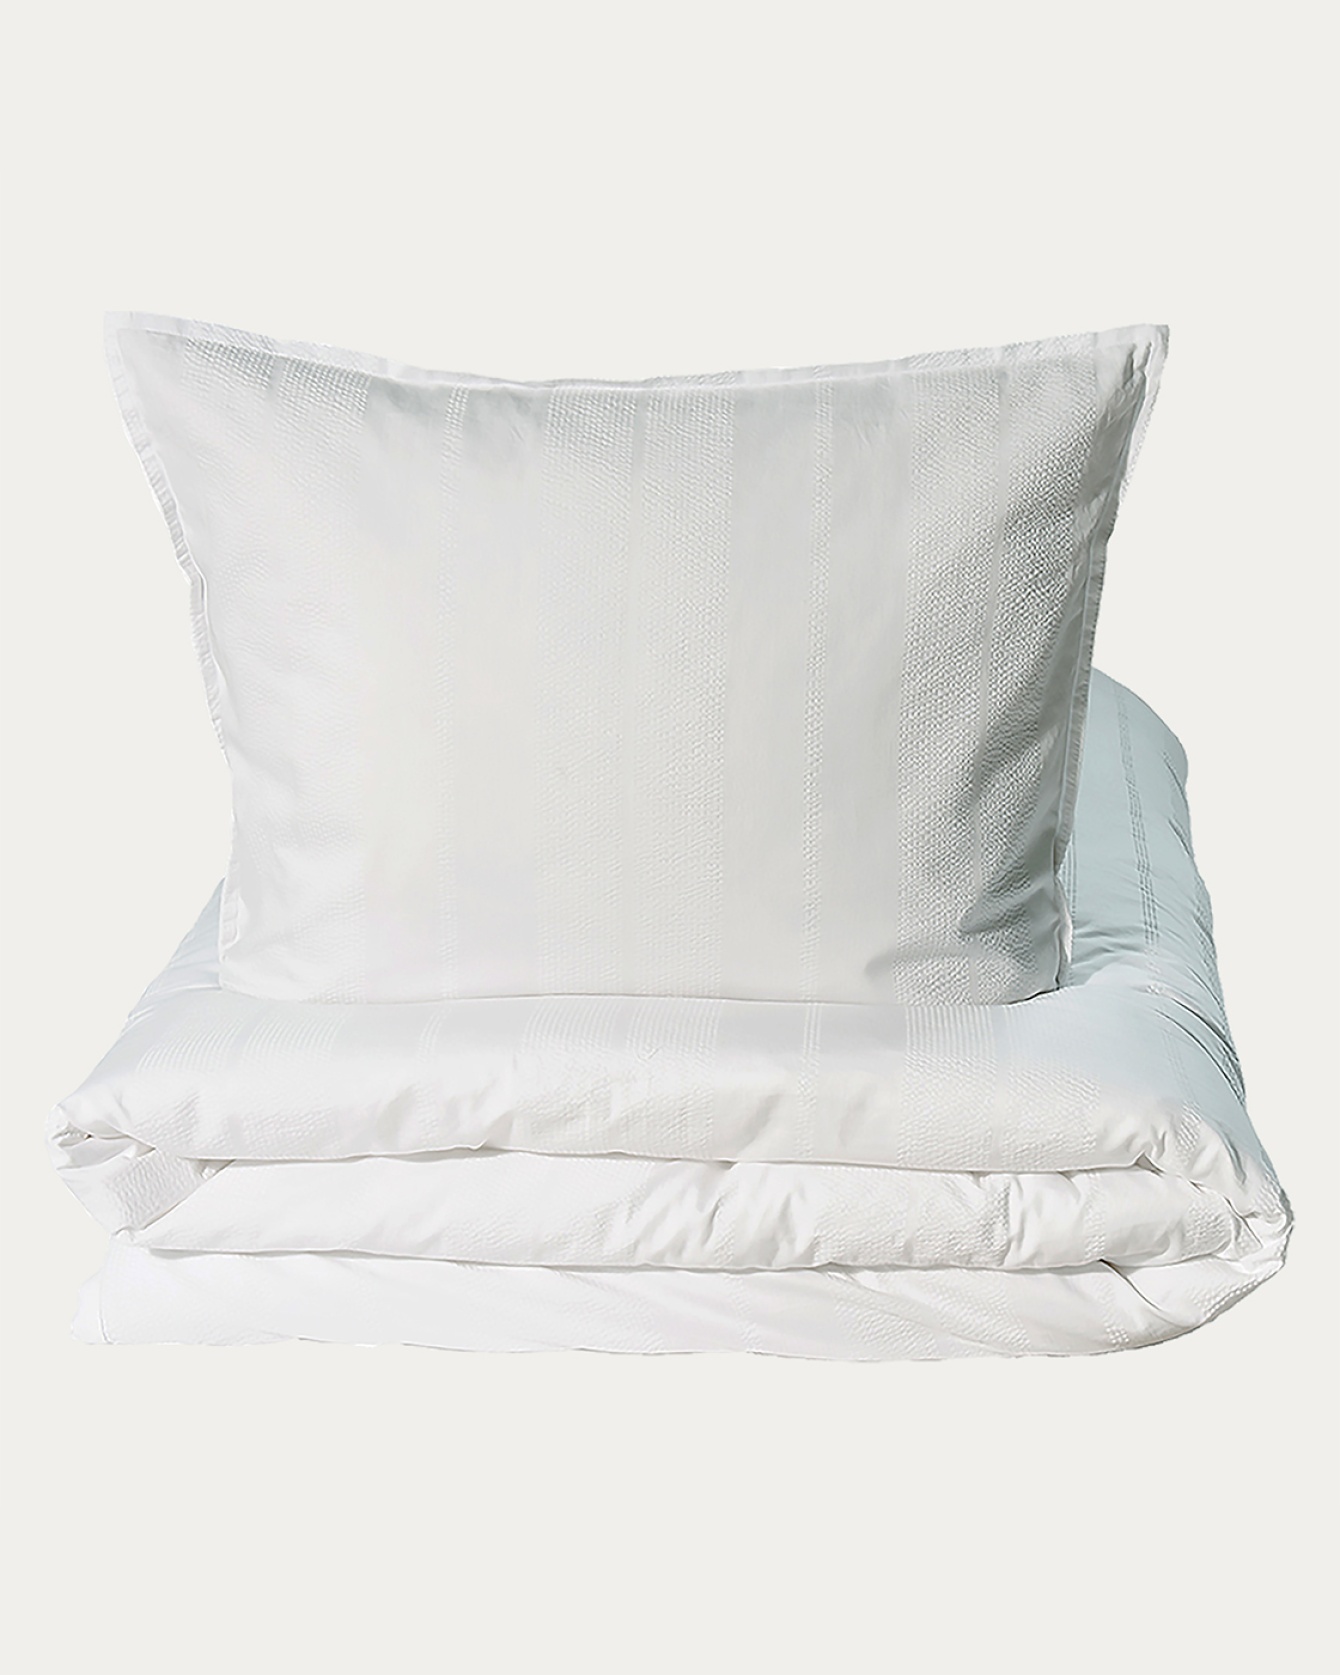 Product image bright white YASMIN bed set of 100% organic cotton satin from LINUM DESIGN. Size duvet cover 220x220 cm, two pillowcases 50x60 cm.